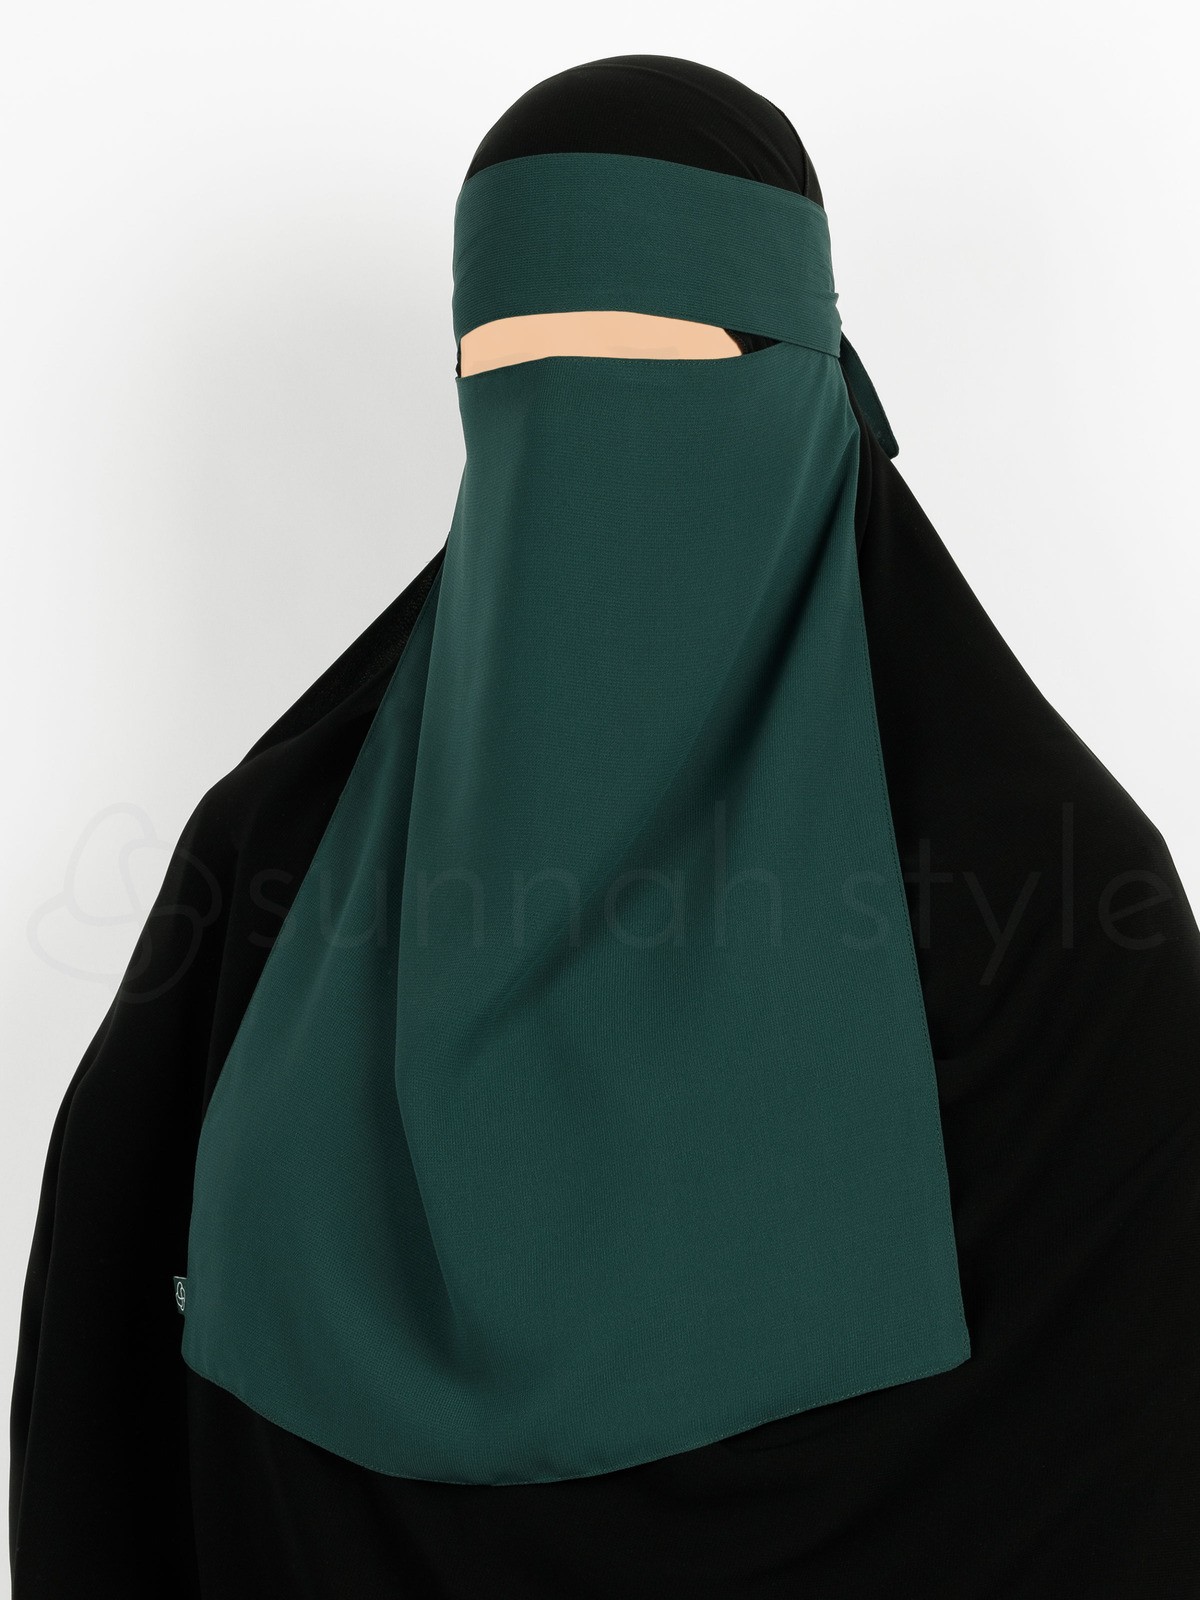 Sunnah Style - Pull-Down One Layer Niqab (Pine)